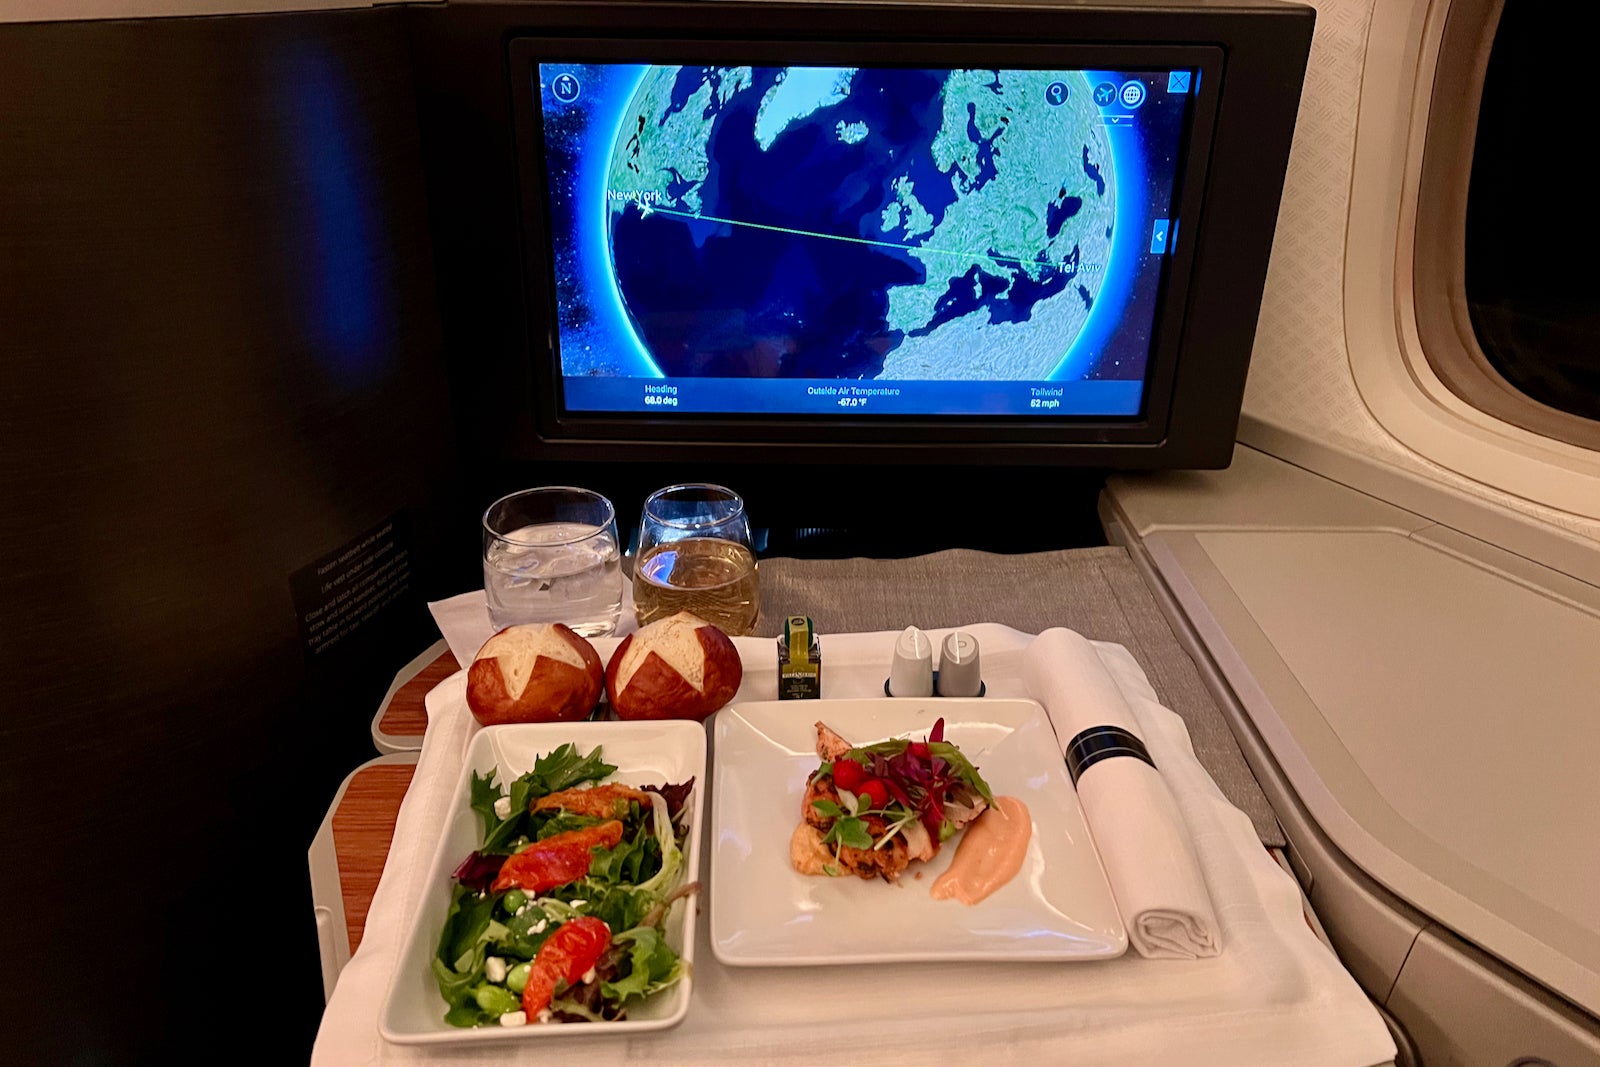 Delta is resuming 3course meals, with ice cream sundaes, in business